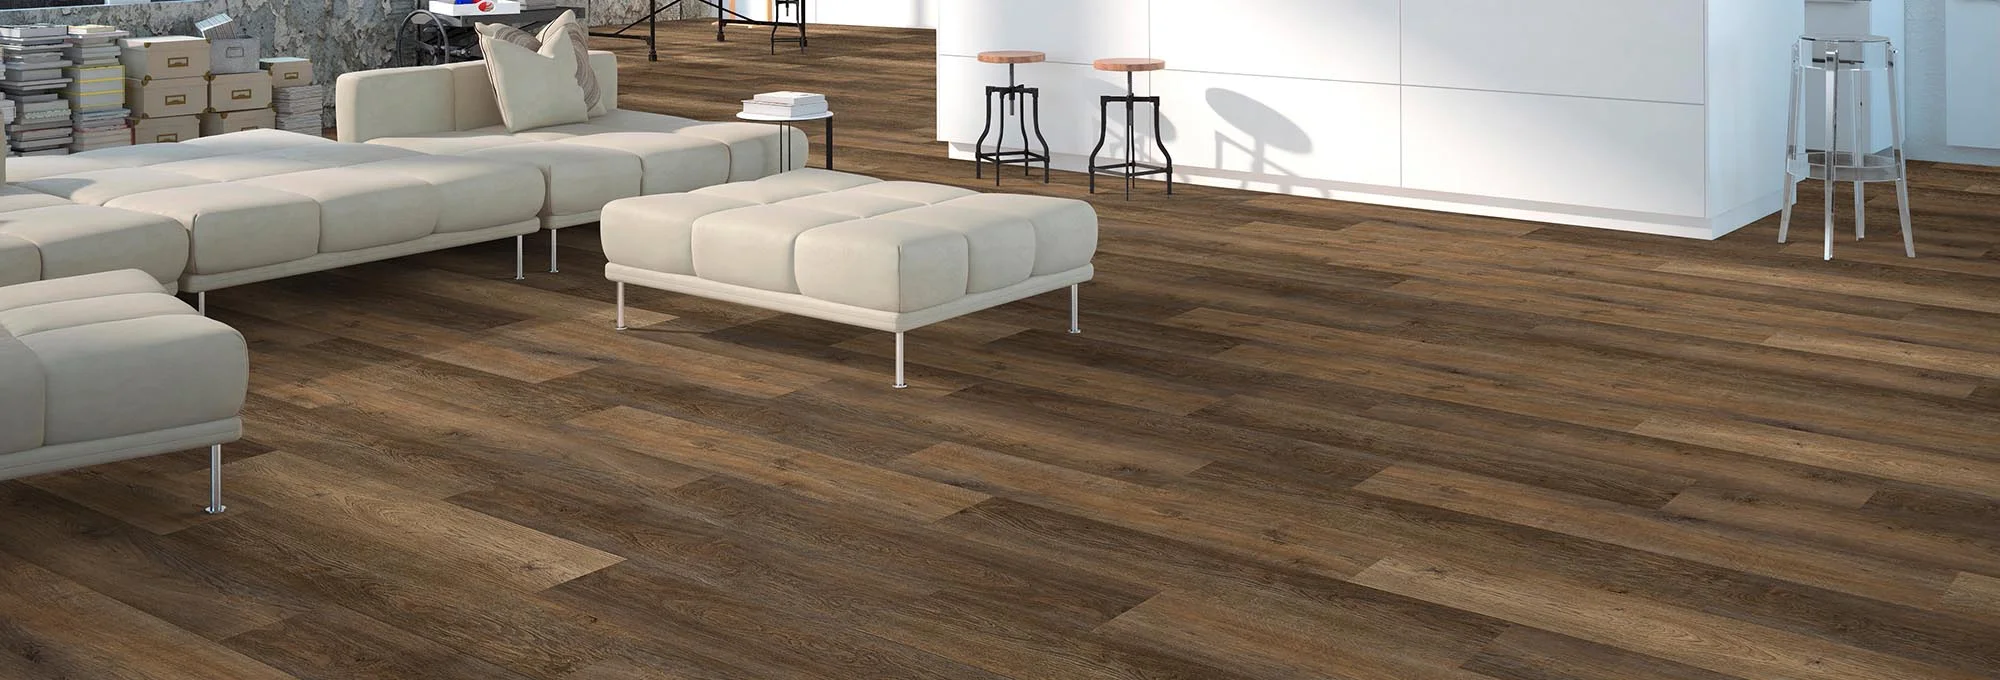 Shop Flooring Products from Aumsbaugh Flooring CarpetsPlus Colortile in Columbia City, IN